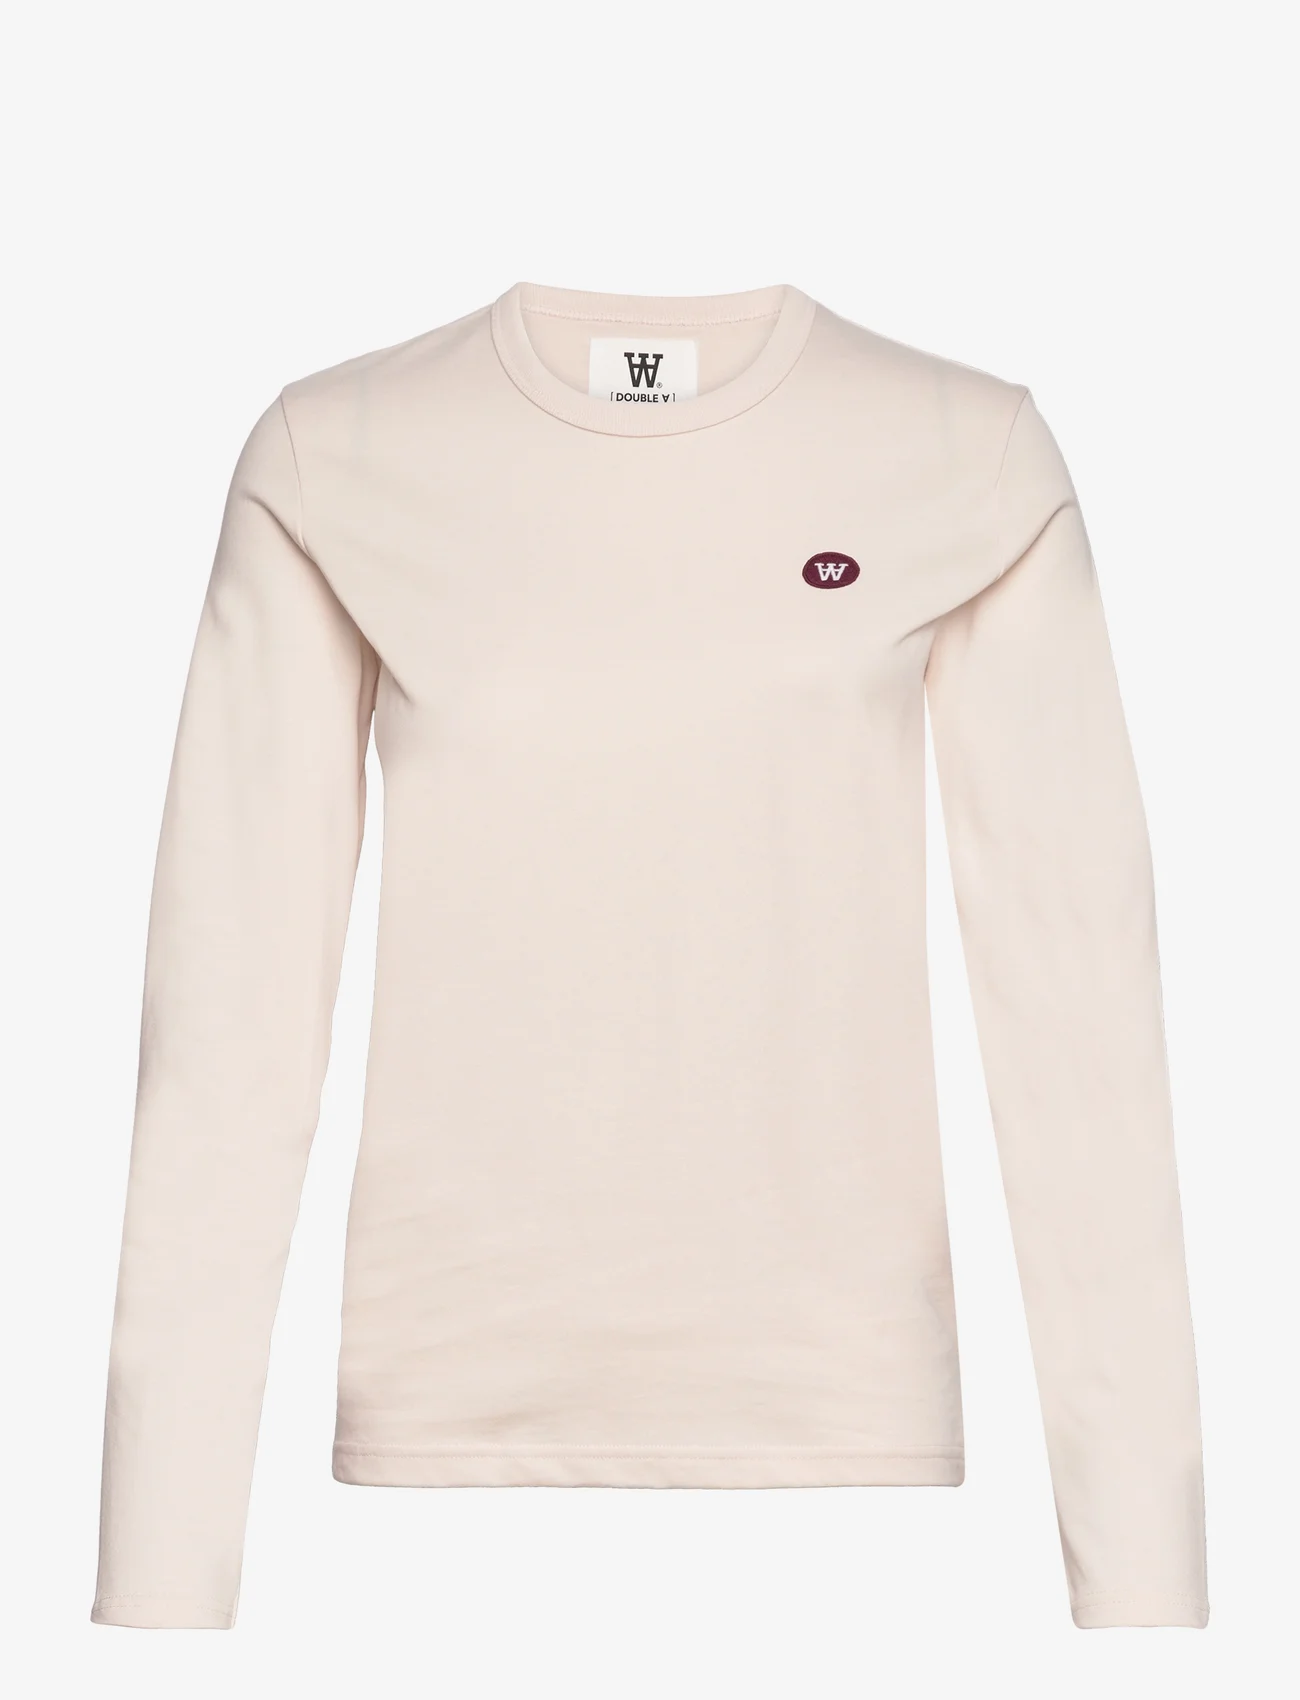 Double A by Wood Wood - Moa longsleeve - t-shirts & tops - almost mauve - 0